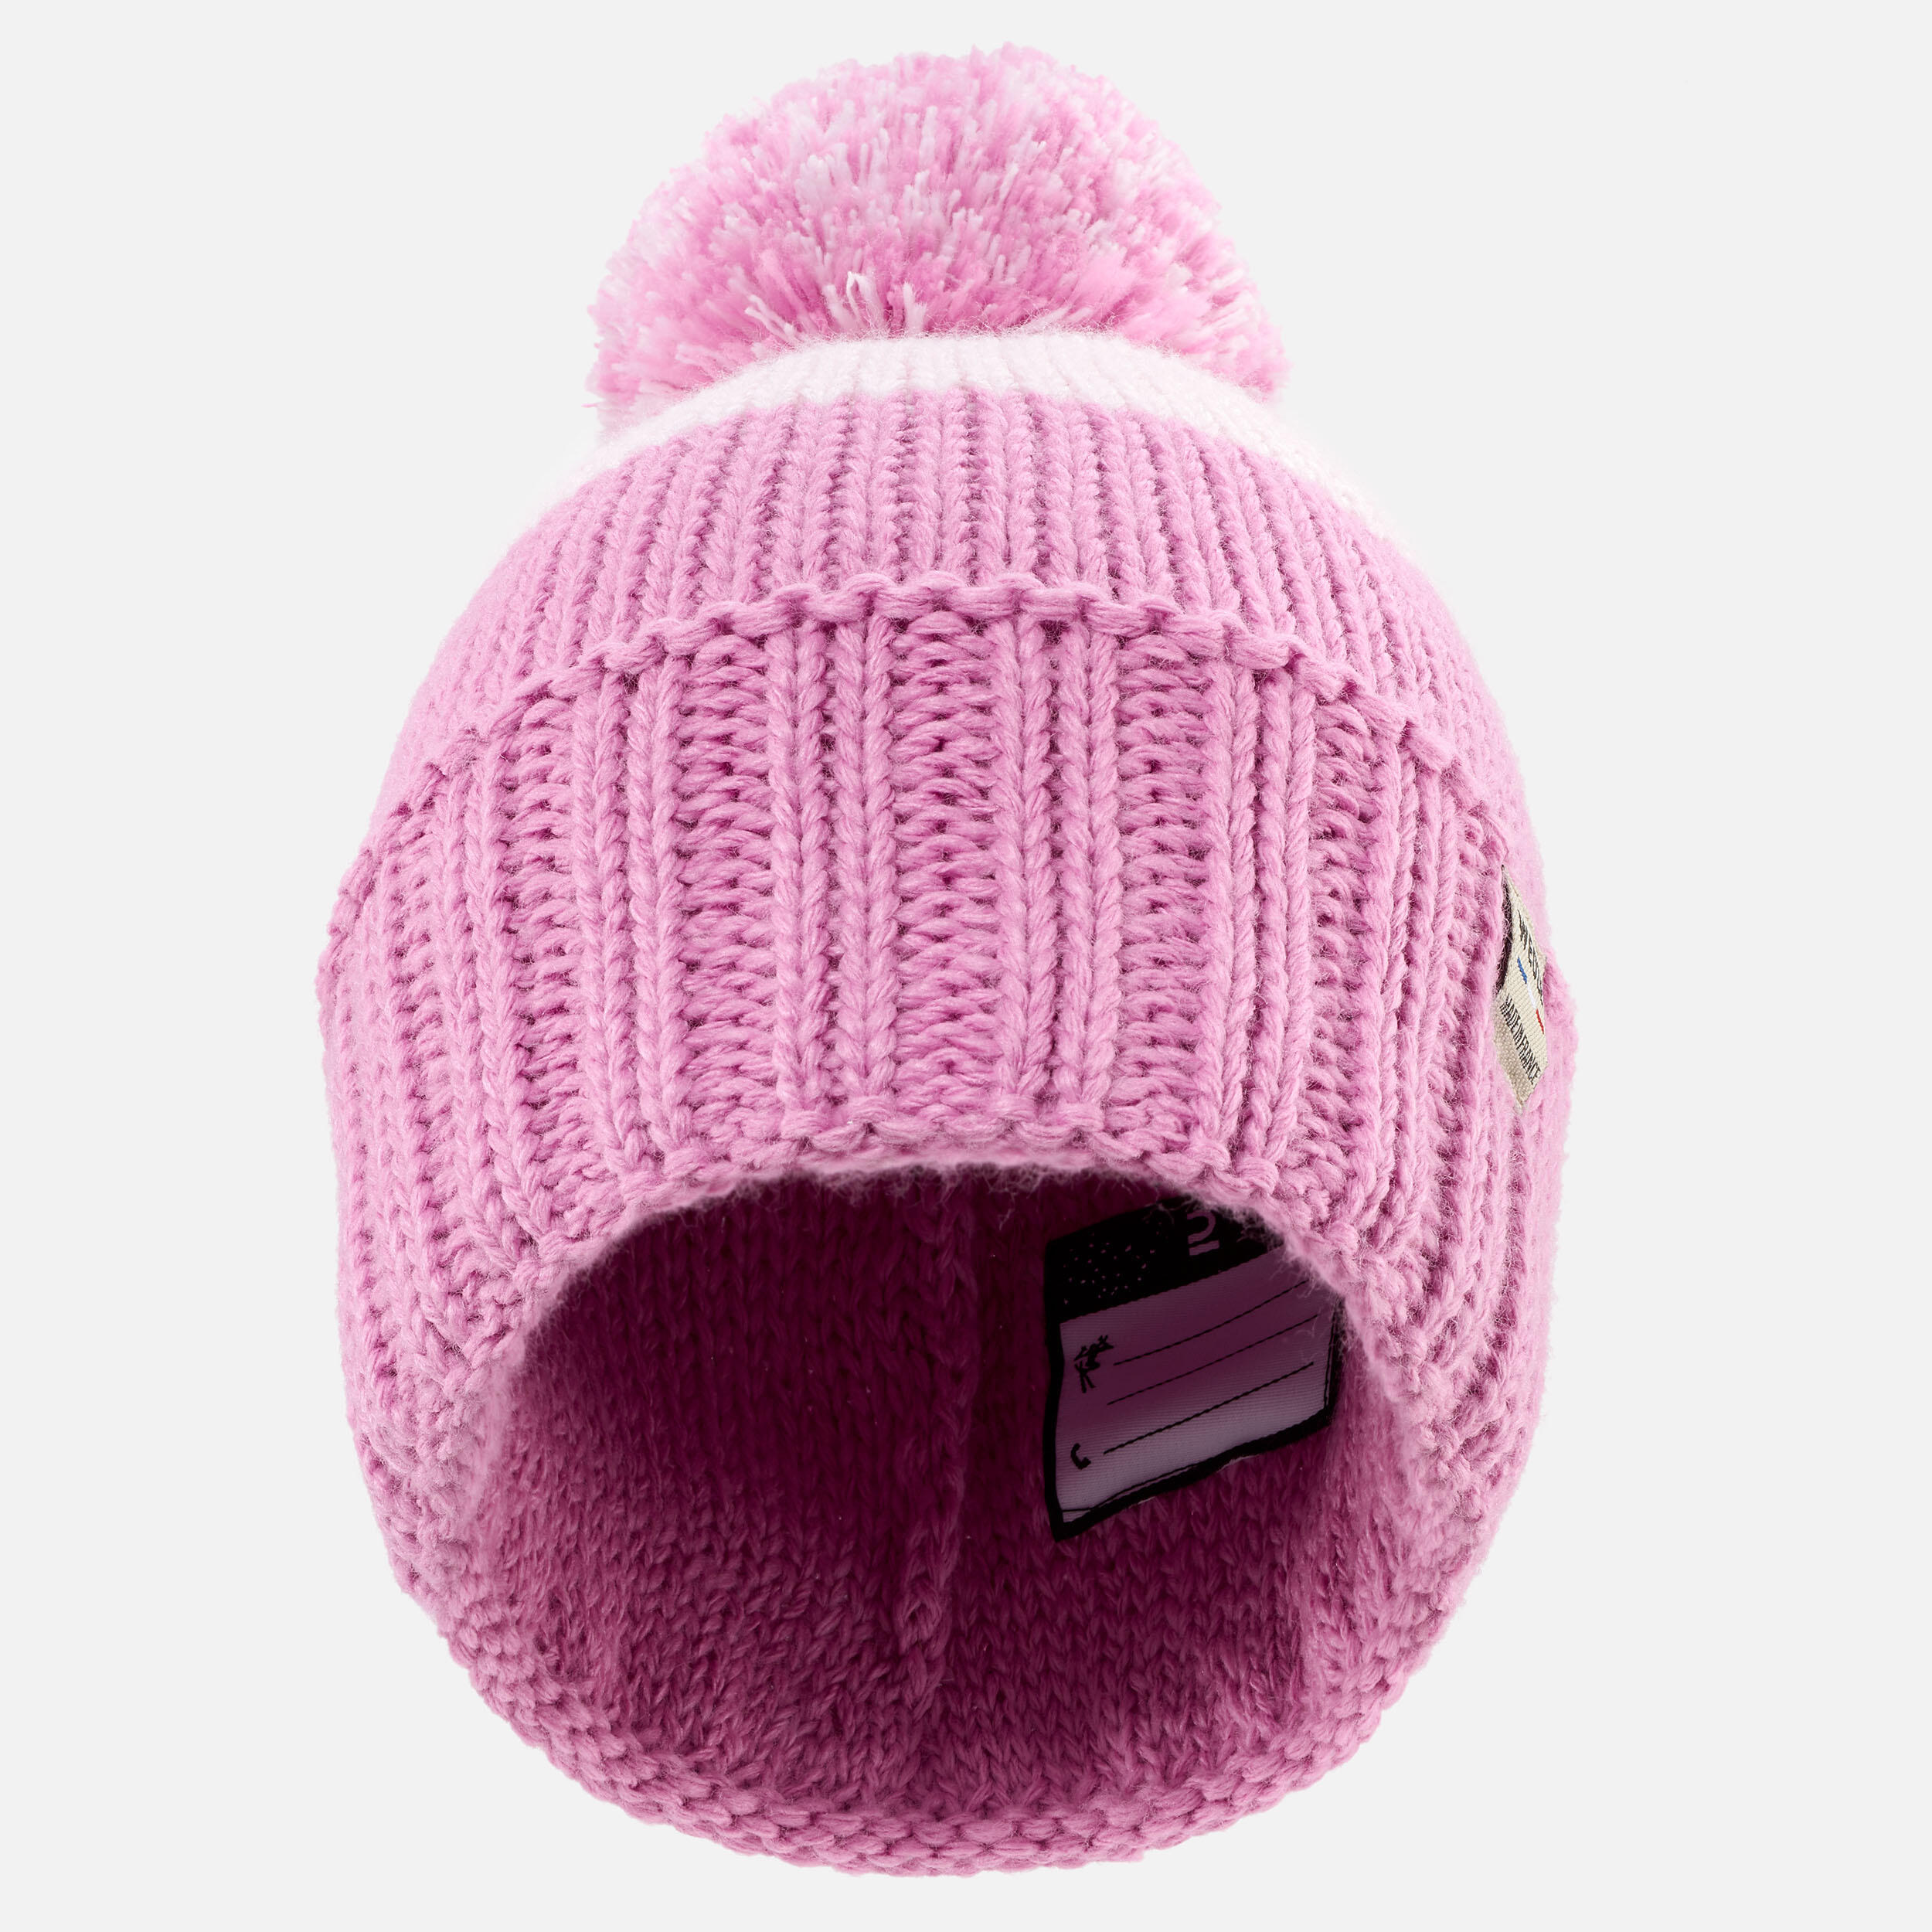 WEDZE Kids’ Ski Hat Grand Nord Made in France - Pink